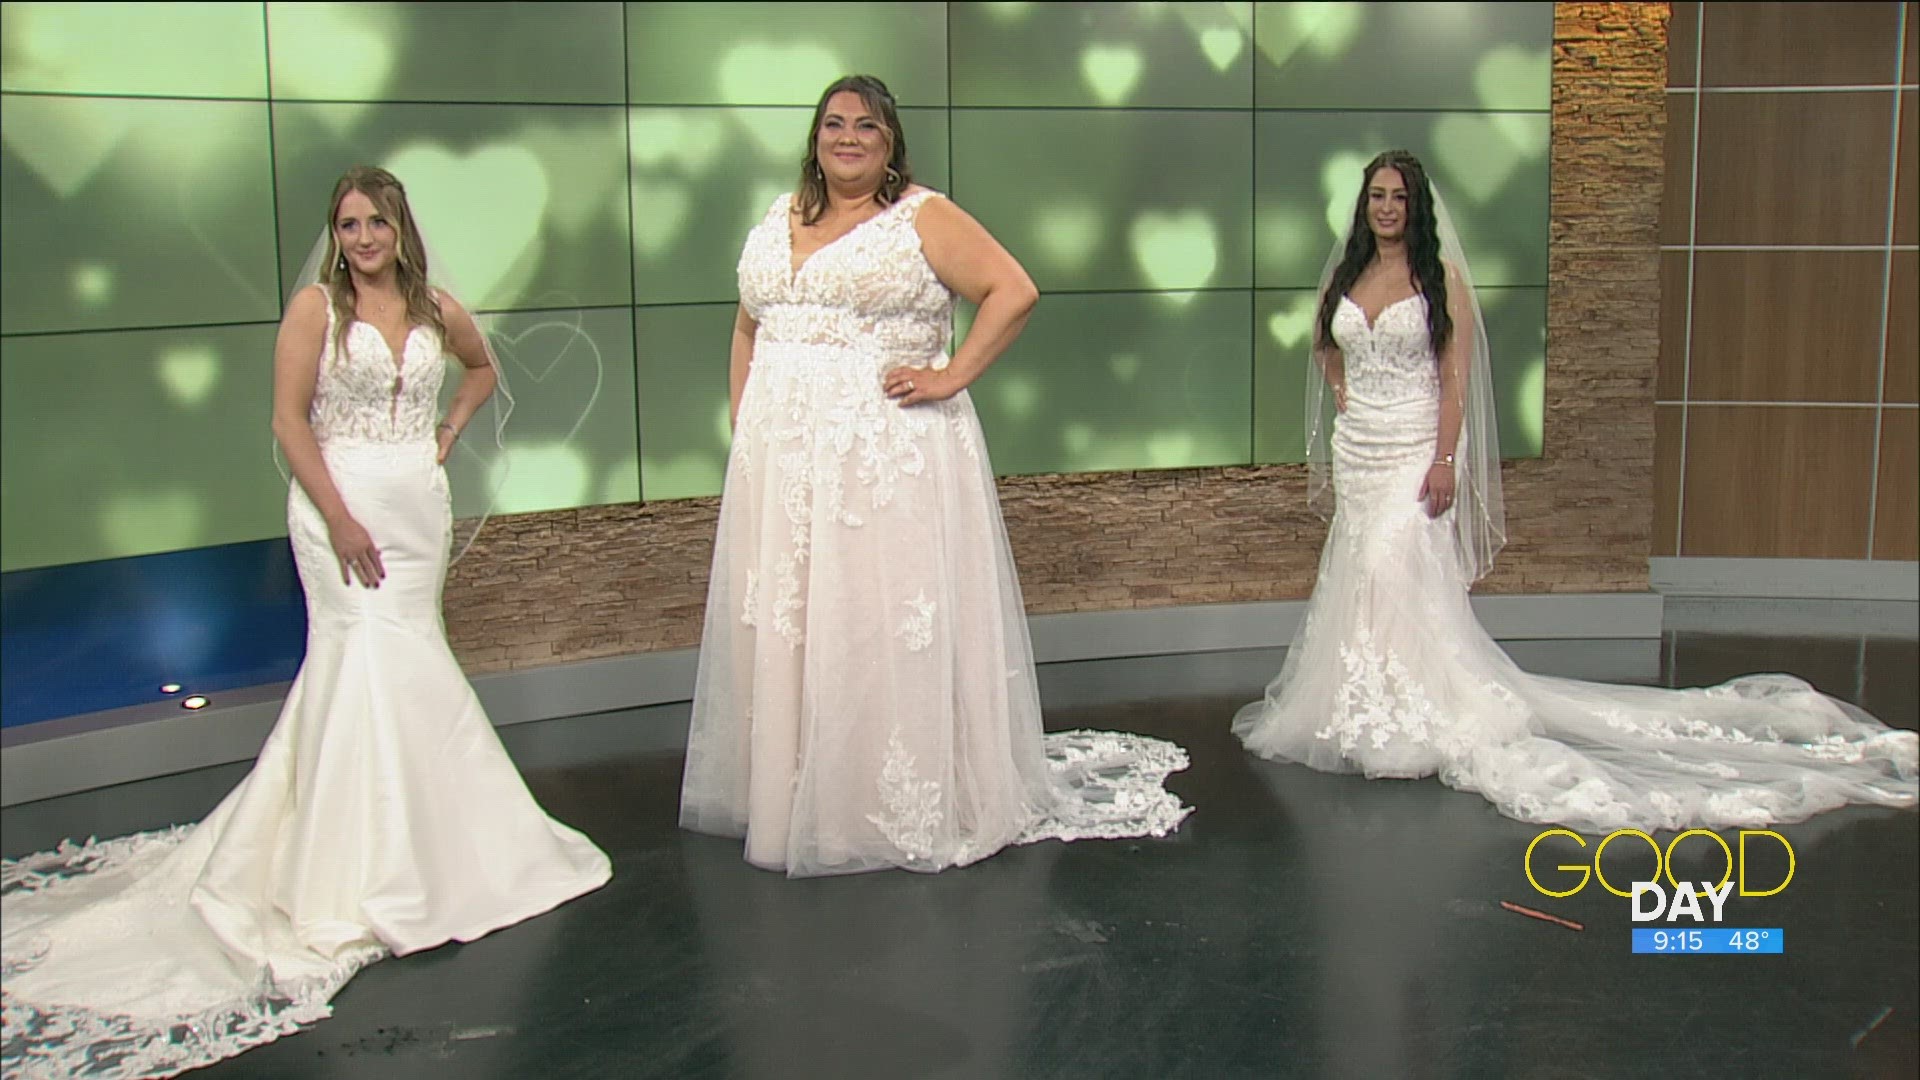 Pretty in white: Wedding gown trends in 2024